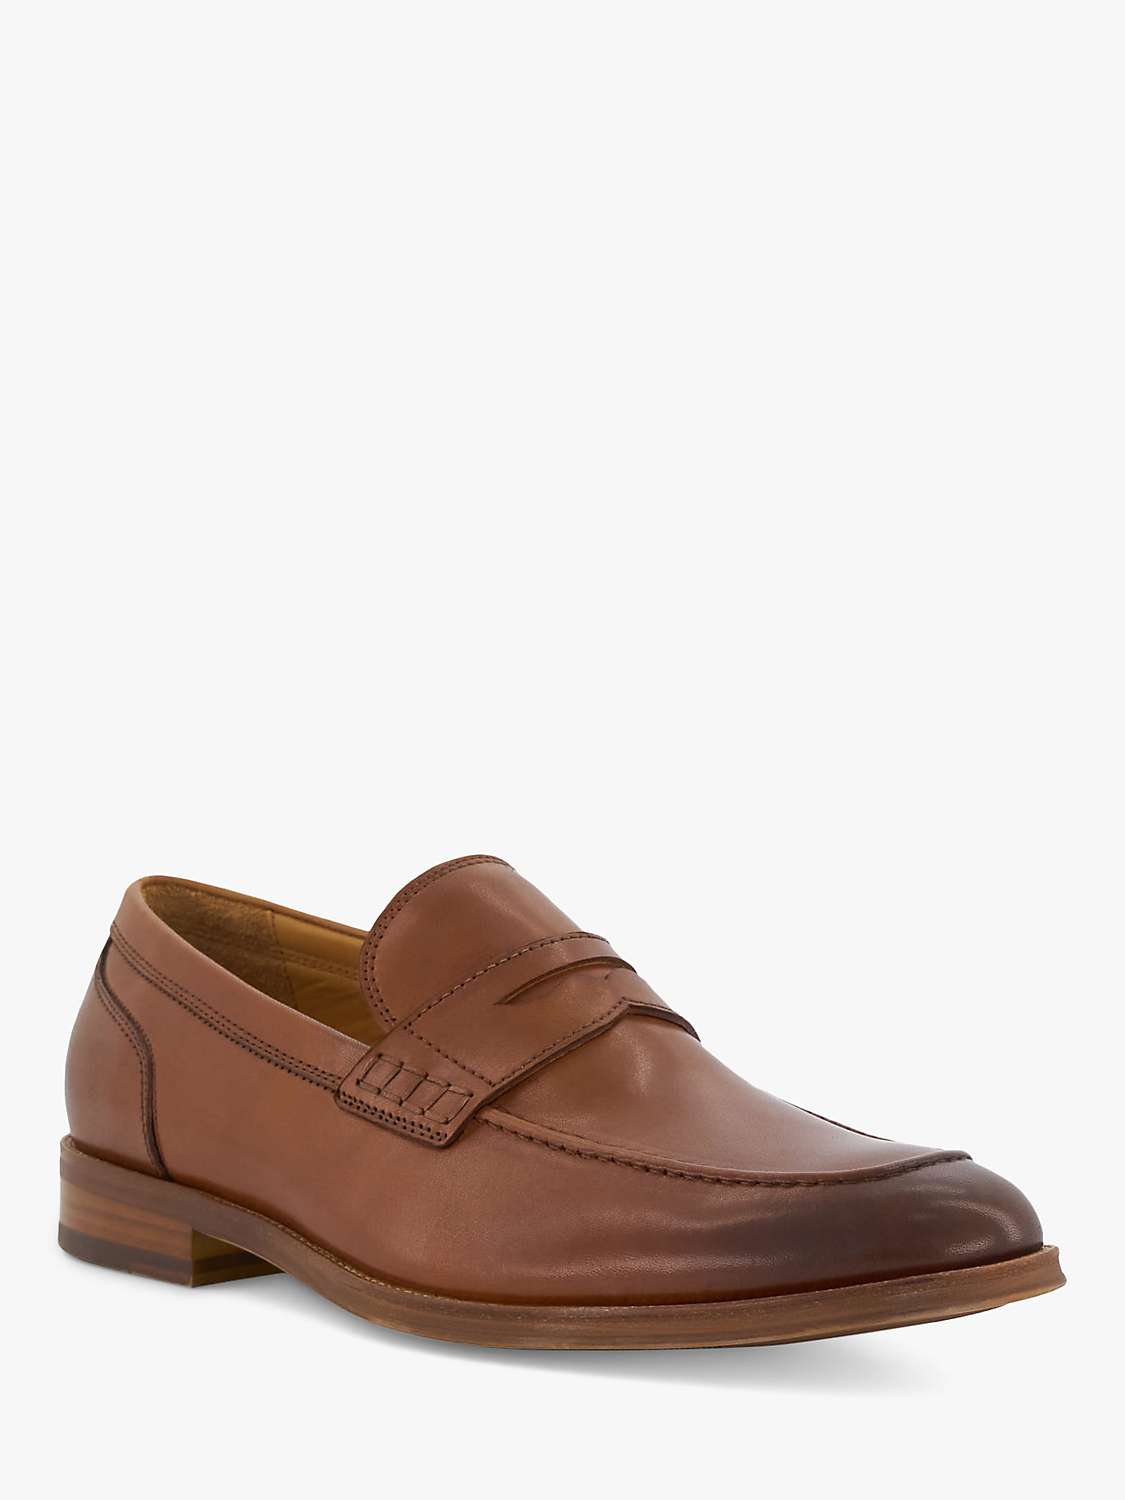 Buy Dune Sulli Leather Moccasin Shoes, Tan Online at johnlewis.com